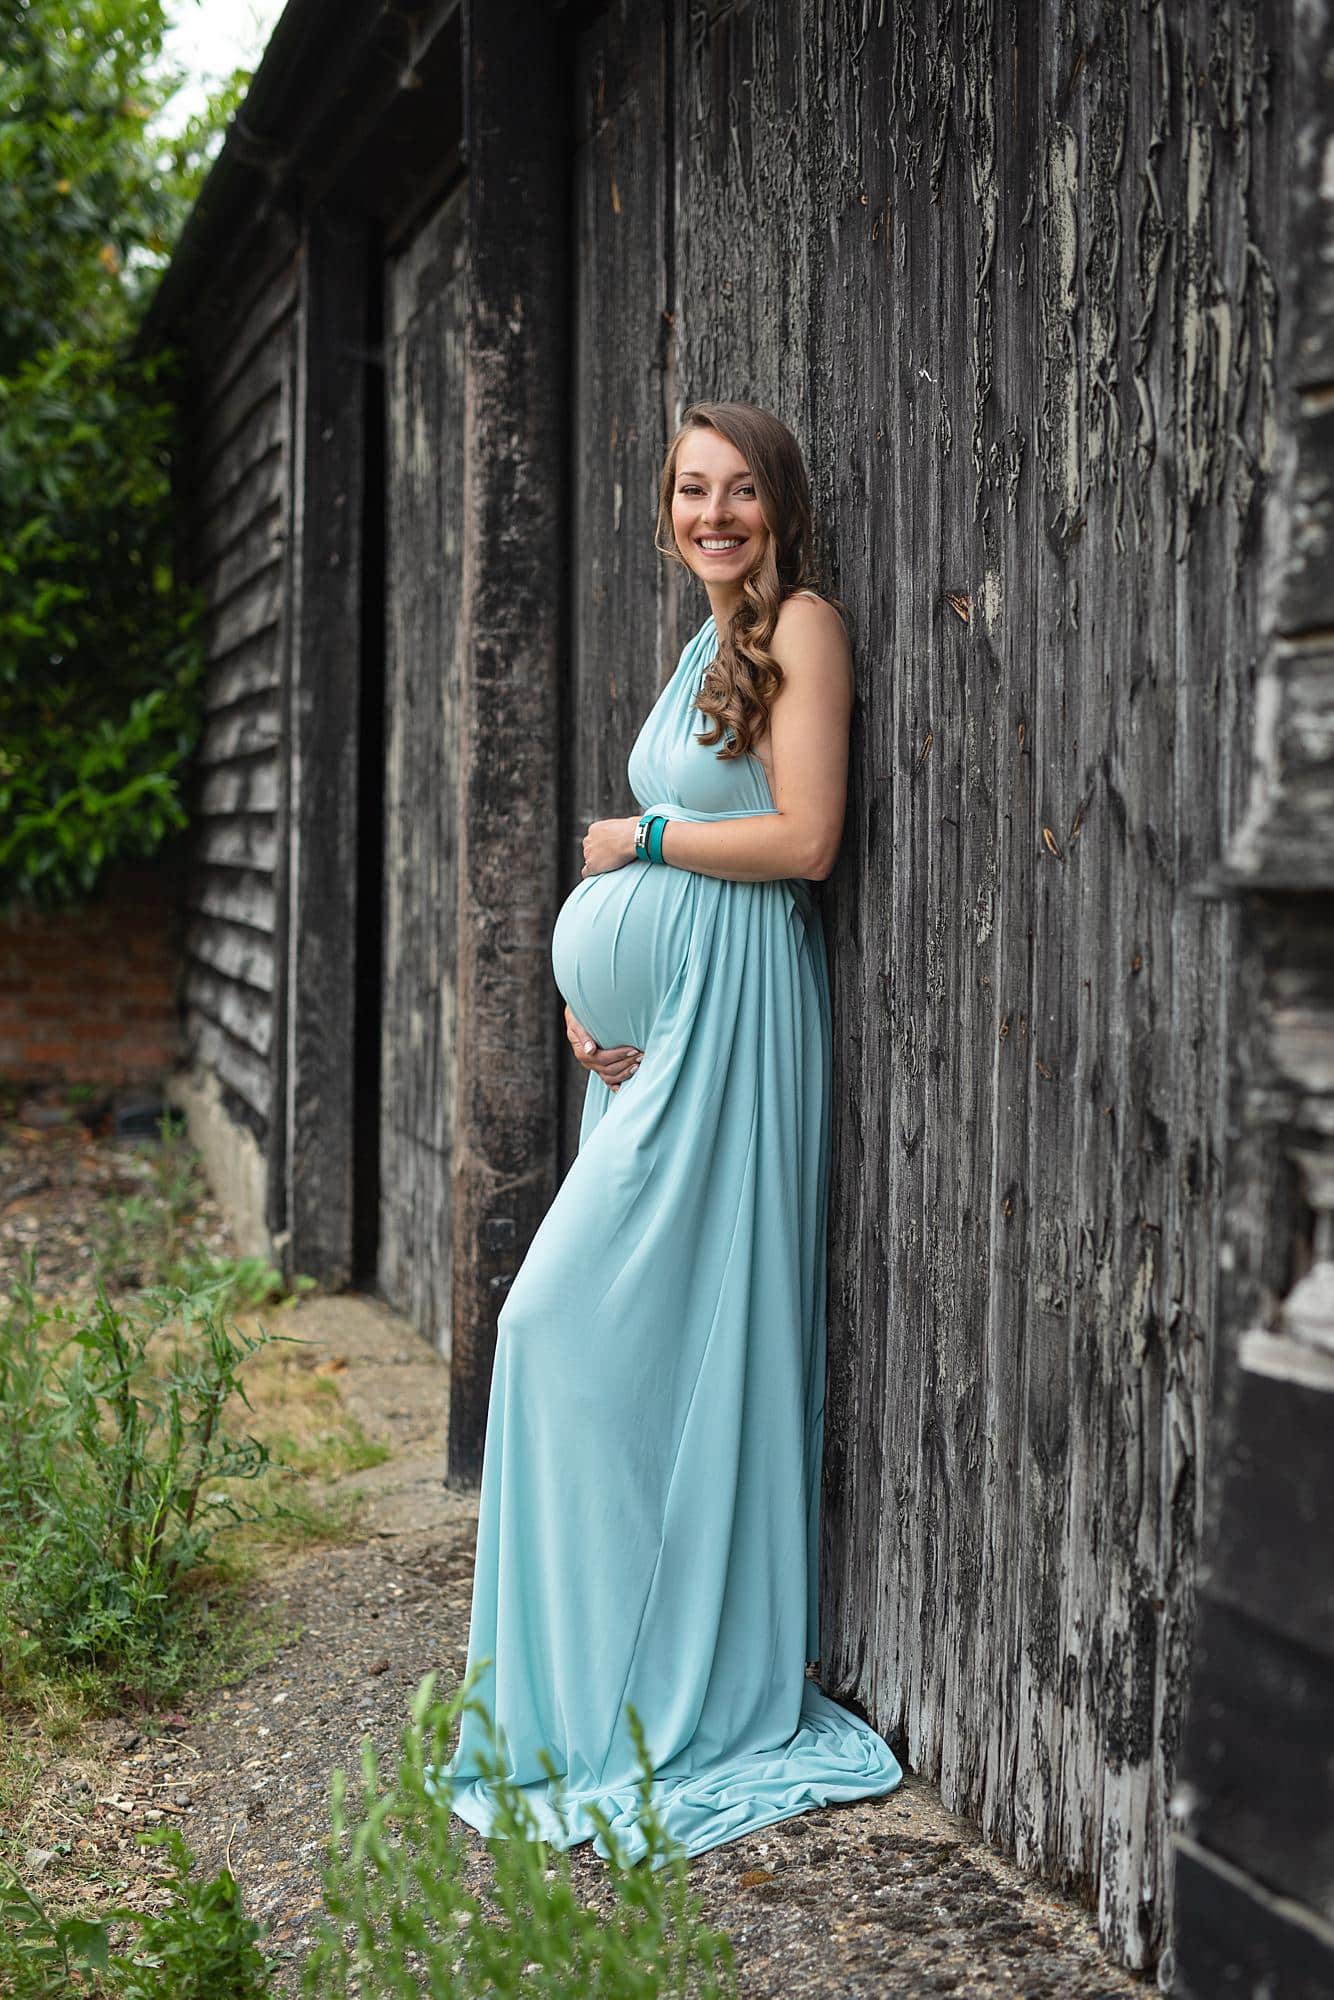 Pregnant woman posing in a blue dress against a barn door for a maternity photoshoot in Alison McKenny's Suffolk studio